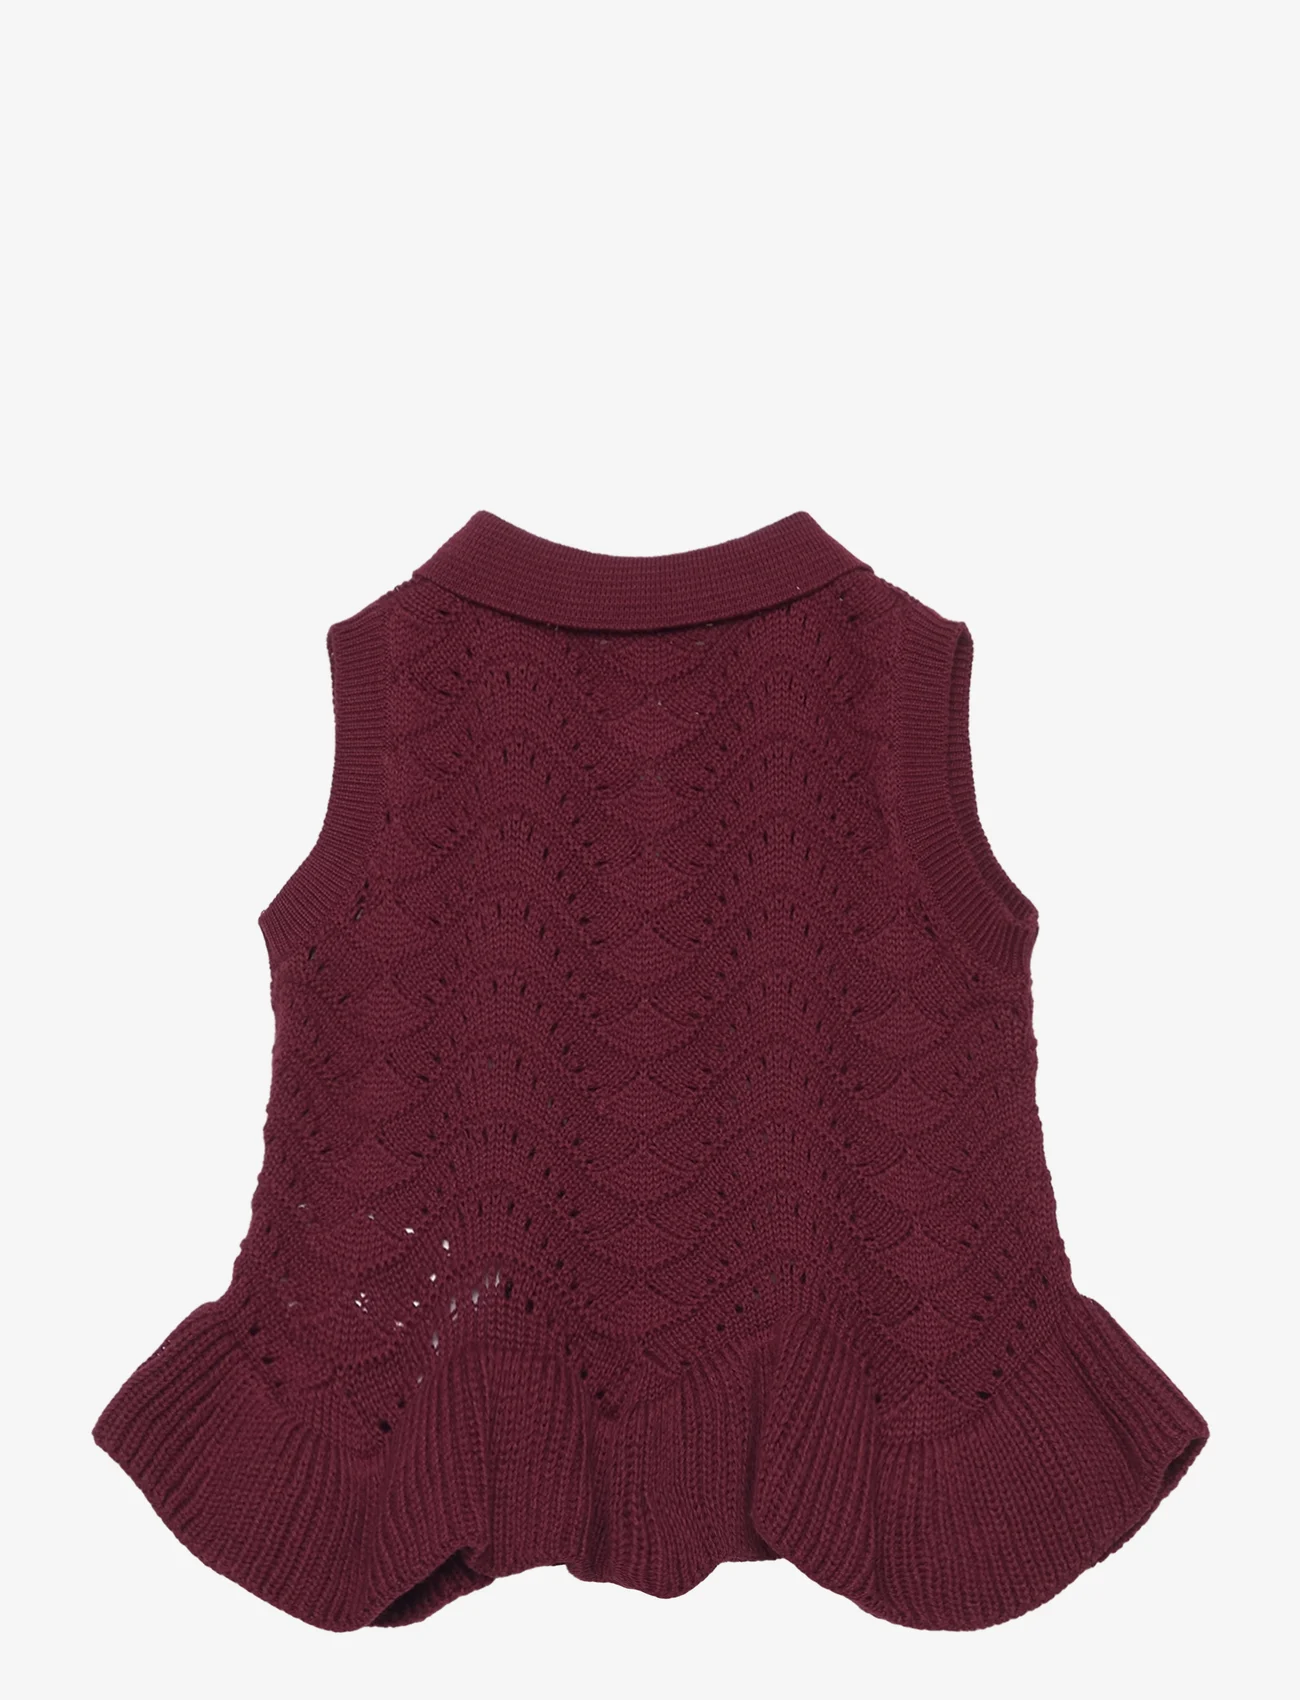 Müsli by Green Cotton - Knit needle out vest baby - vester - fig - 1